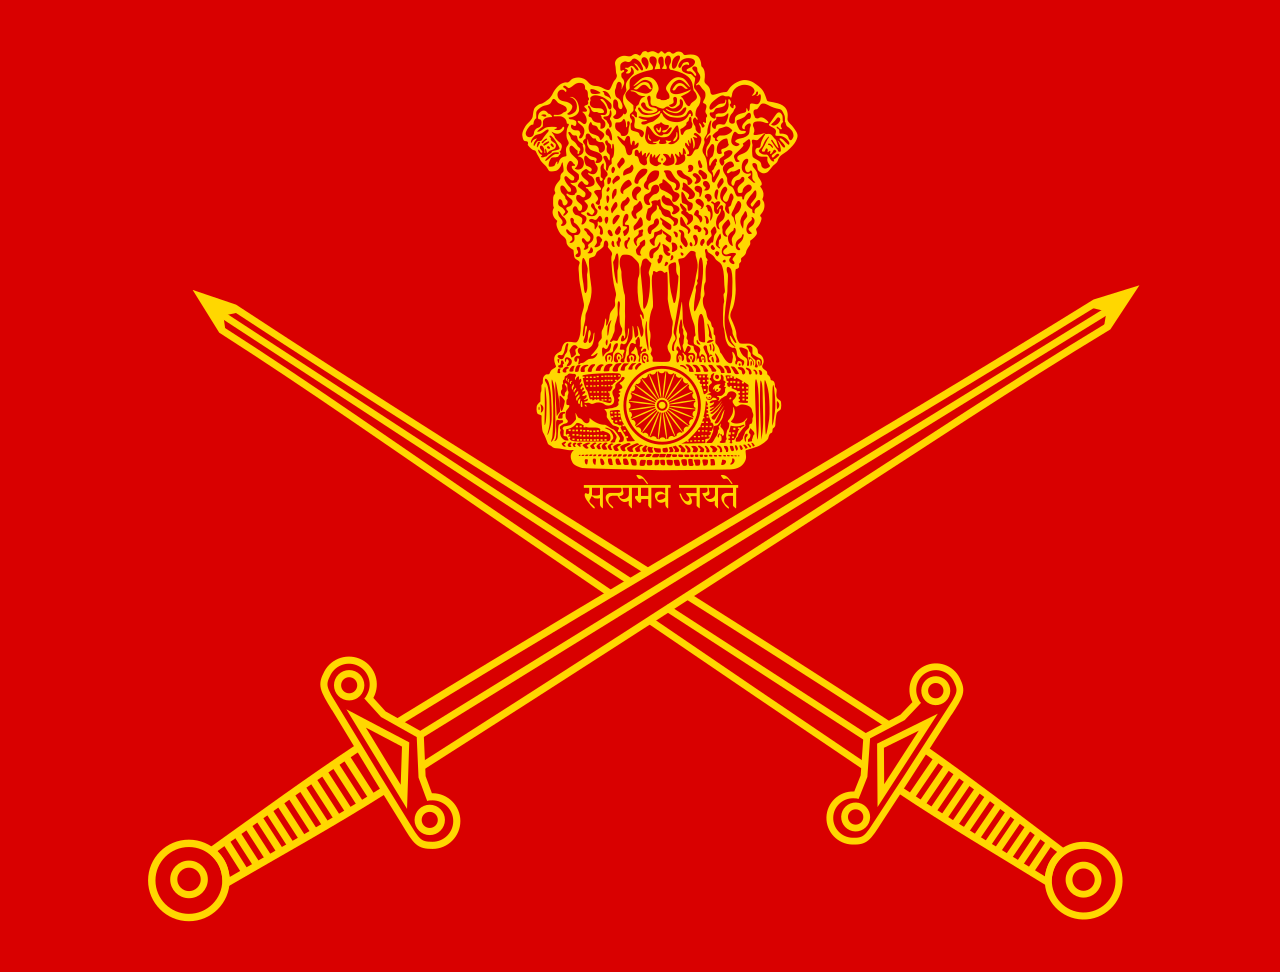 File:ADGPI Indian Army.svg - Wikimedia Commons